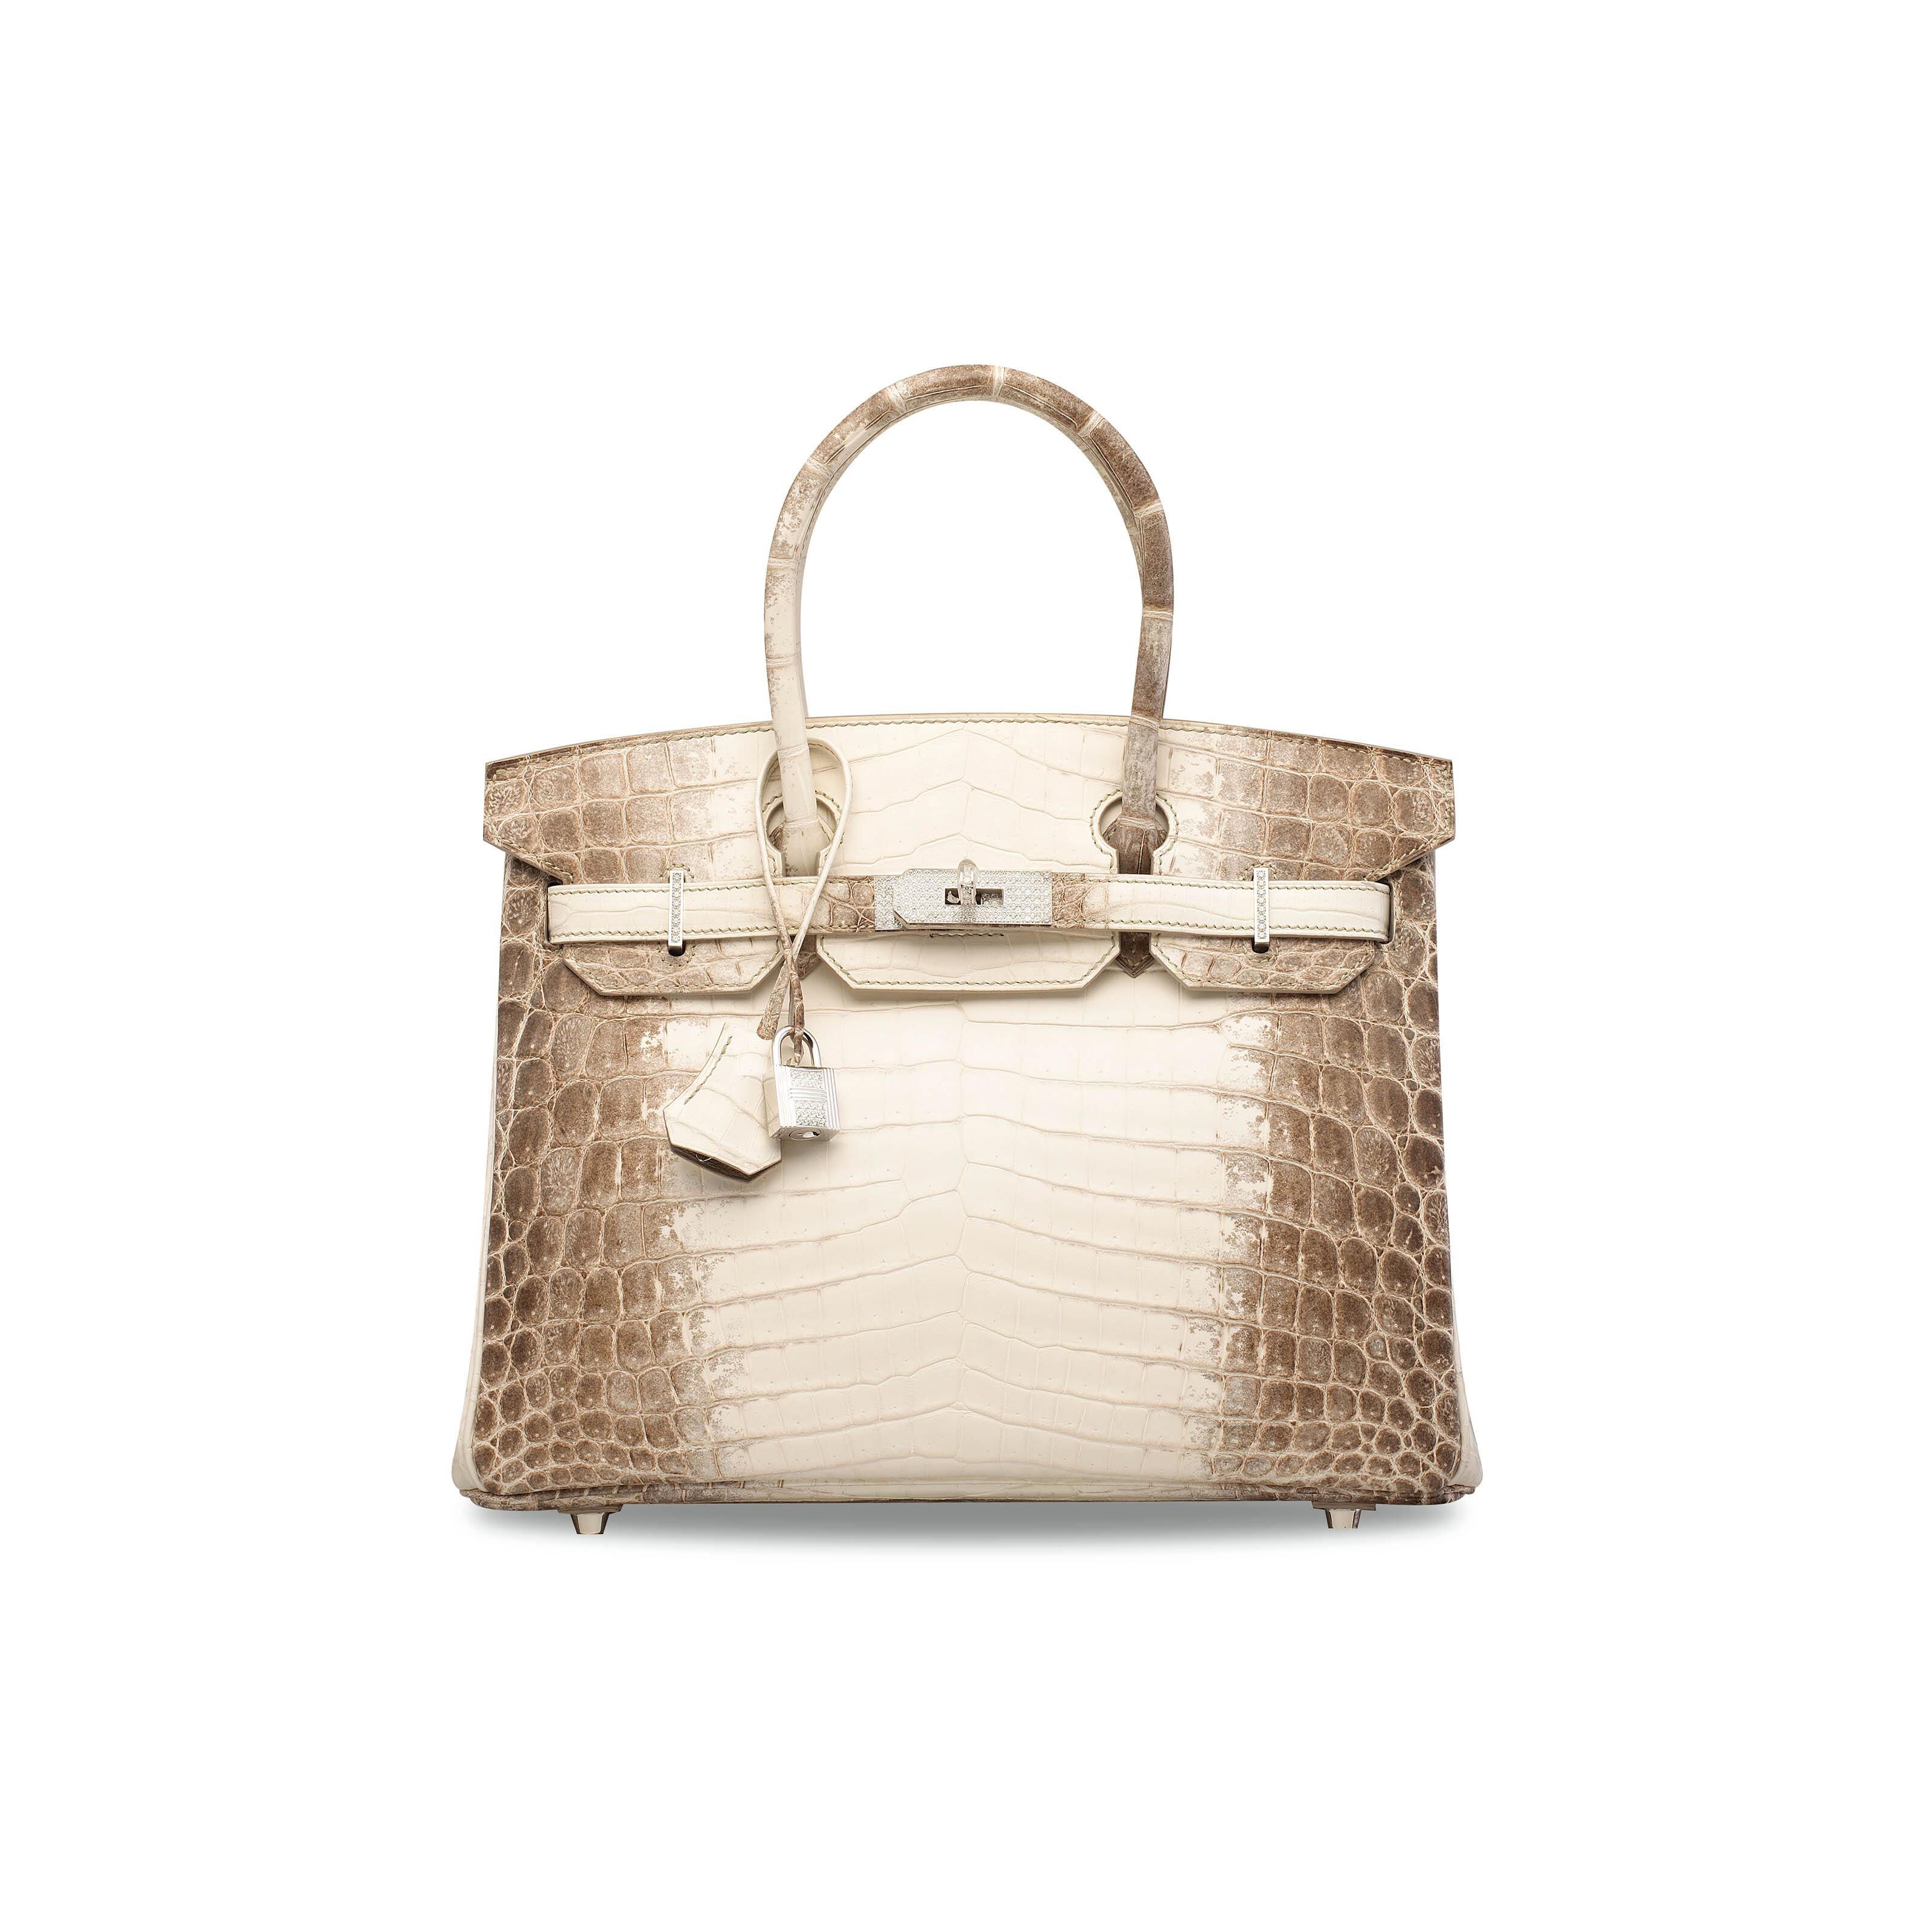 How A Handbag Could Be A Better Investment Than Gold - Society19